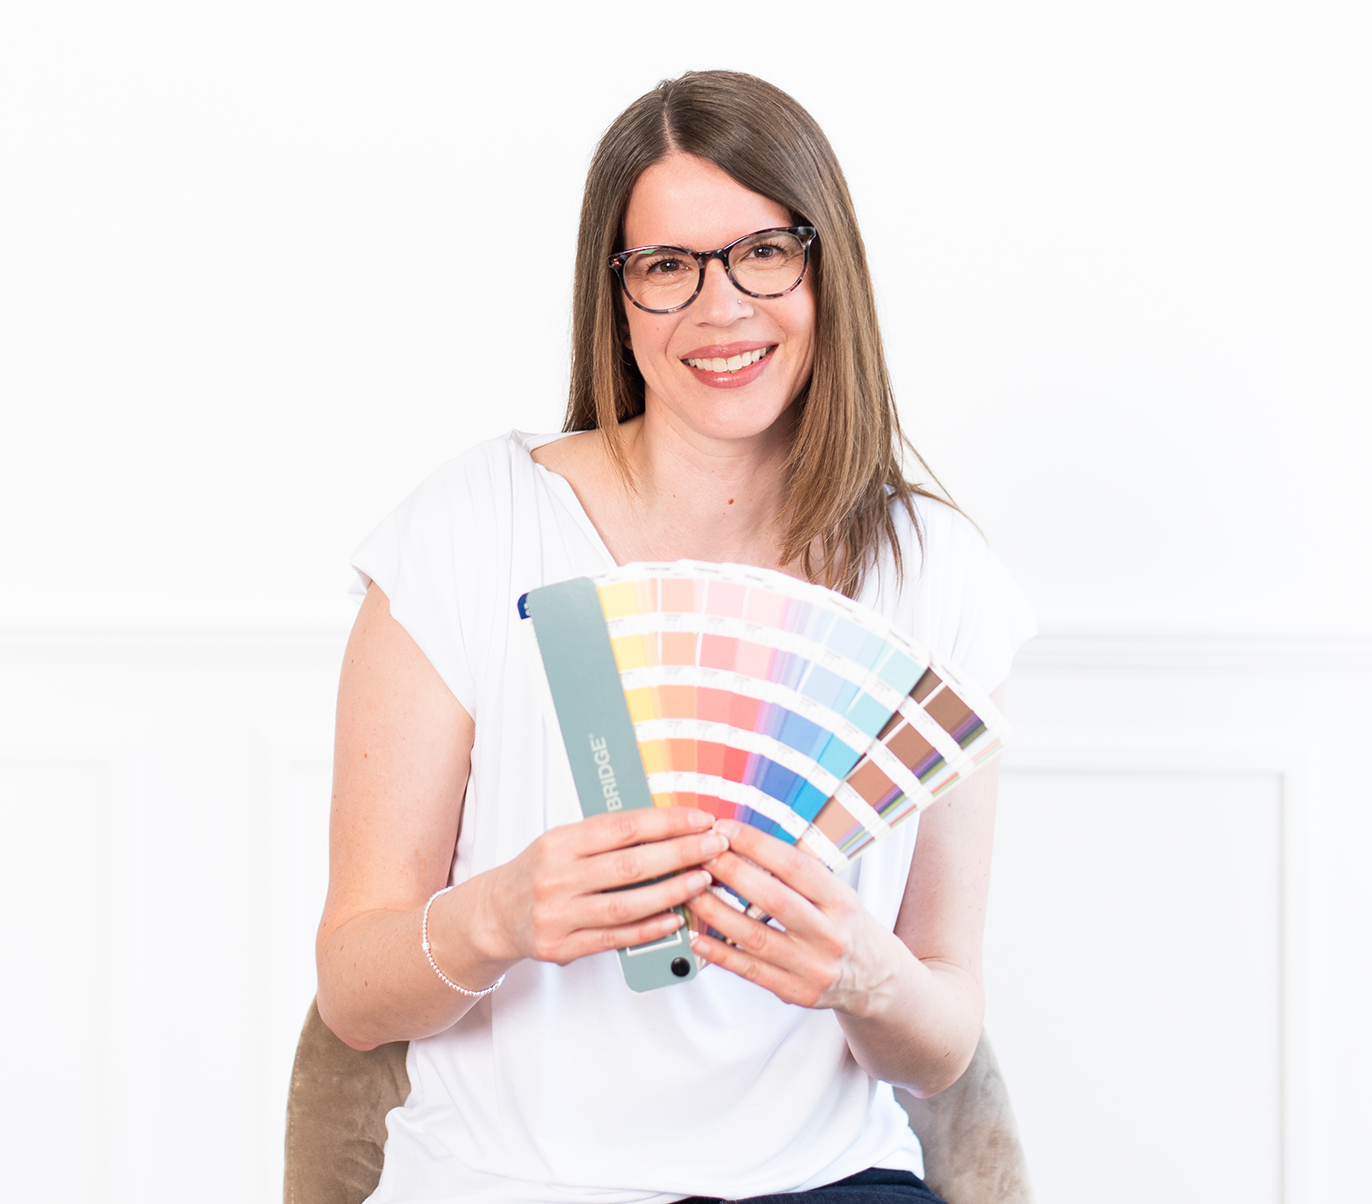 Andrea posing with a fanned open Pantone colour swatch book against a white background wall